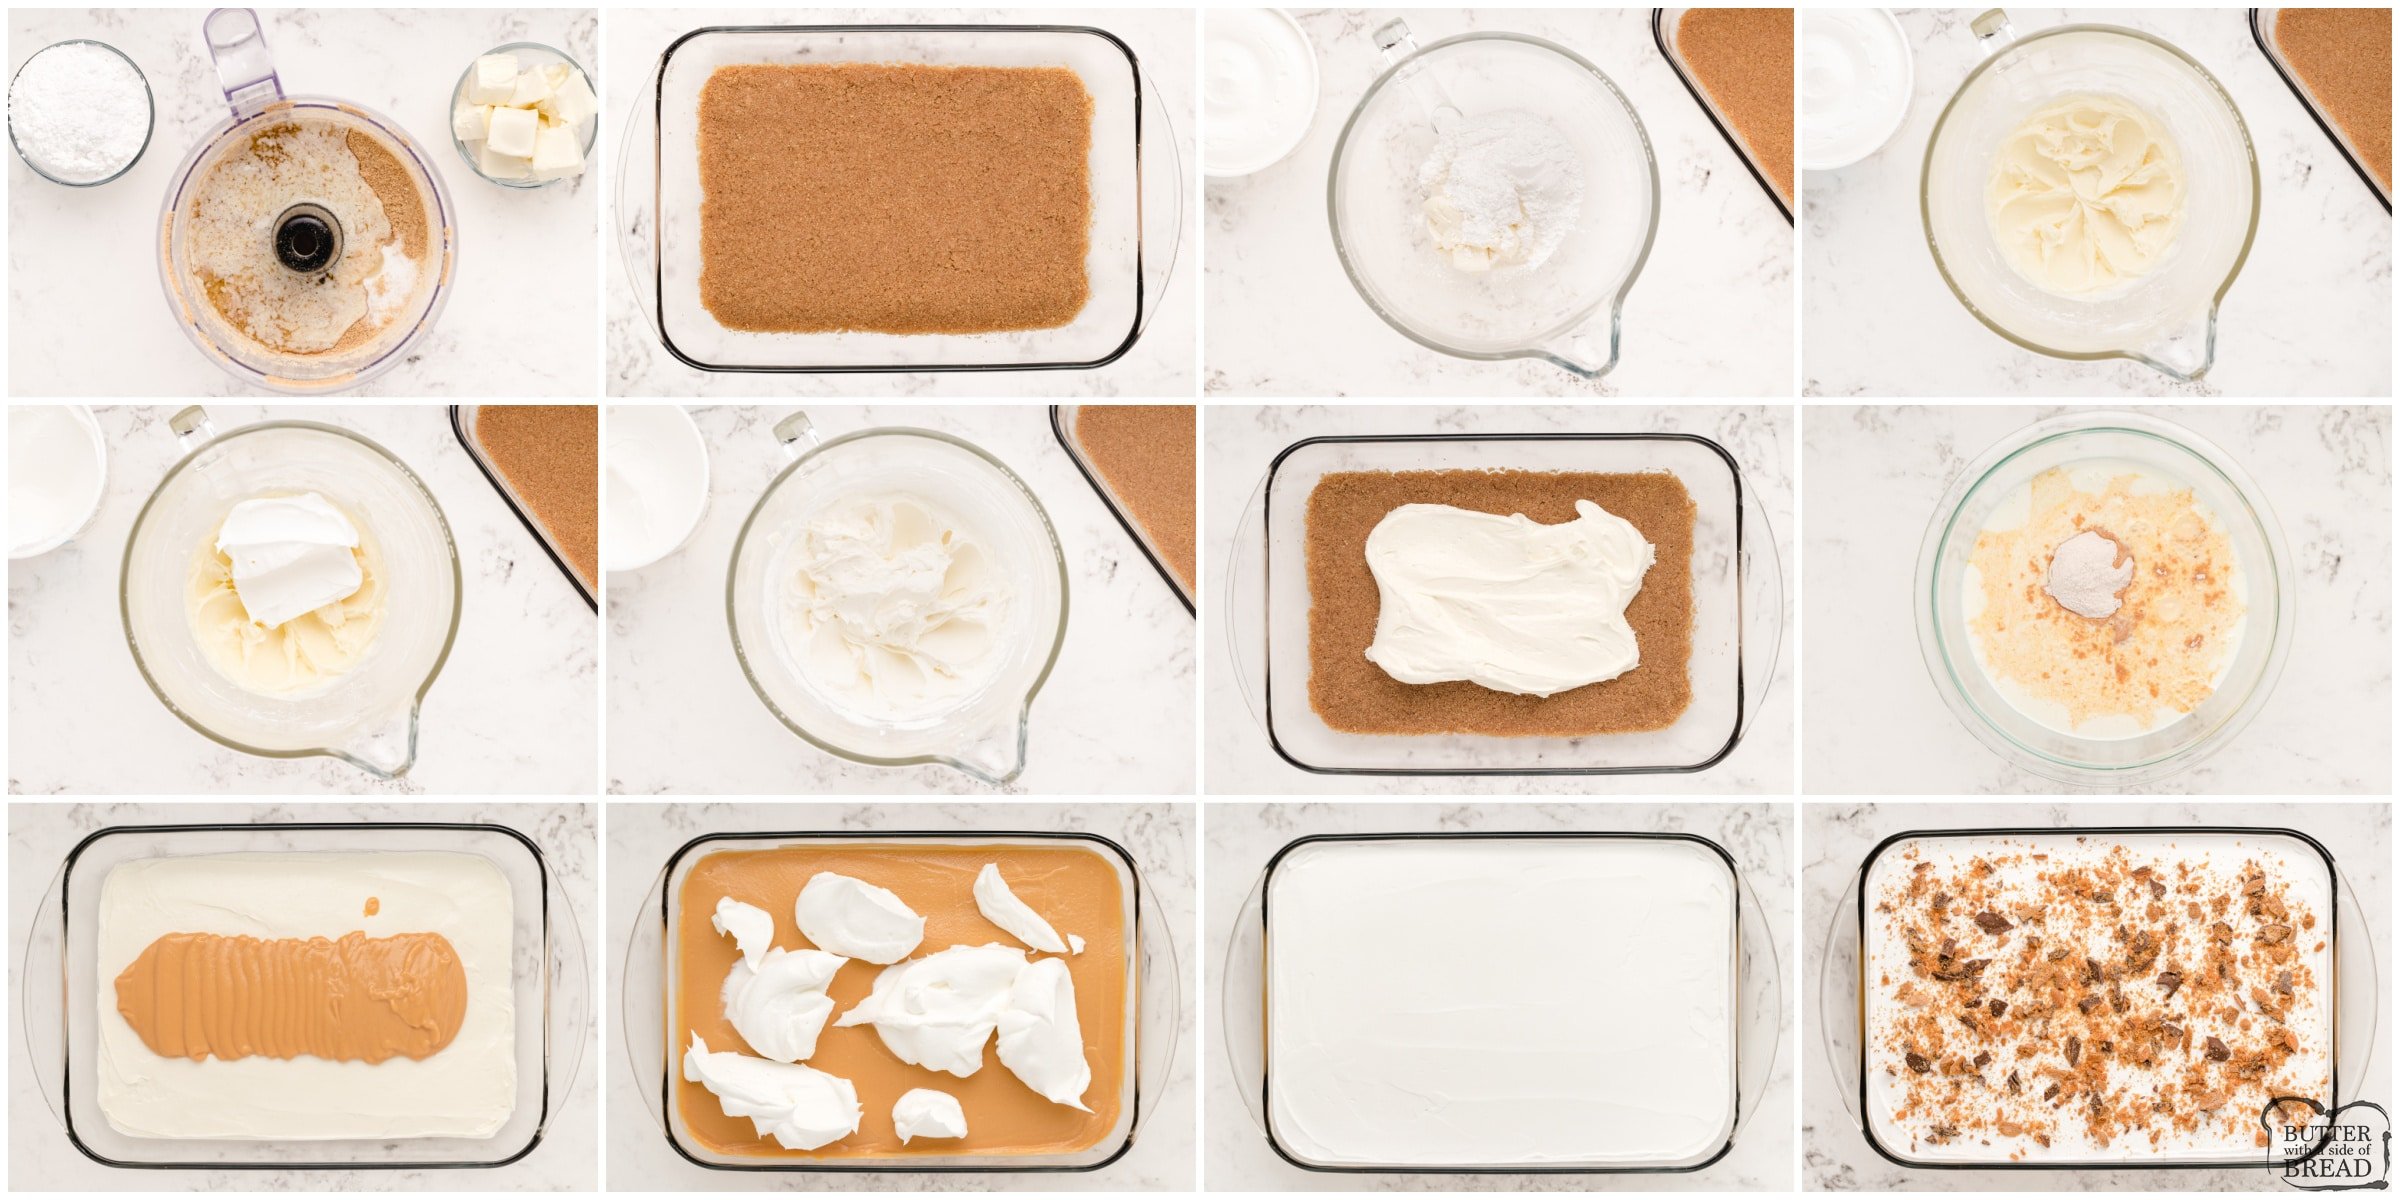 Step by step instructions on how to make Butterscotch Lush